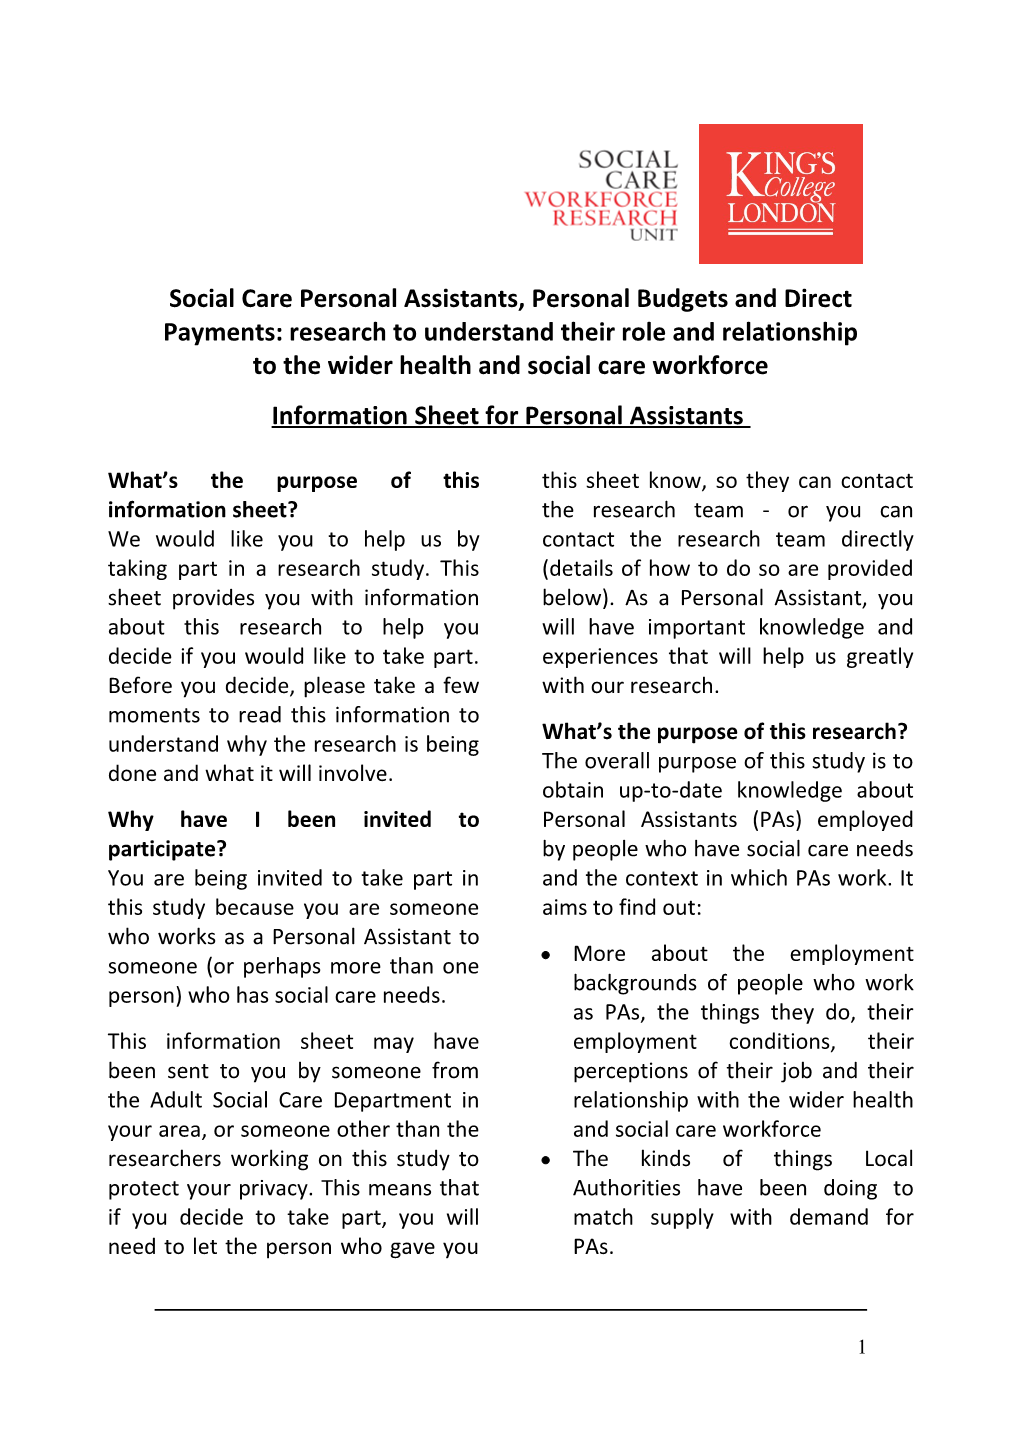 Information Sheet for Personal Assistants